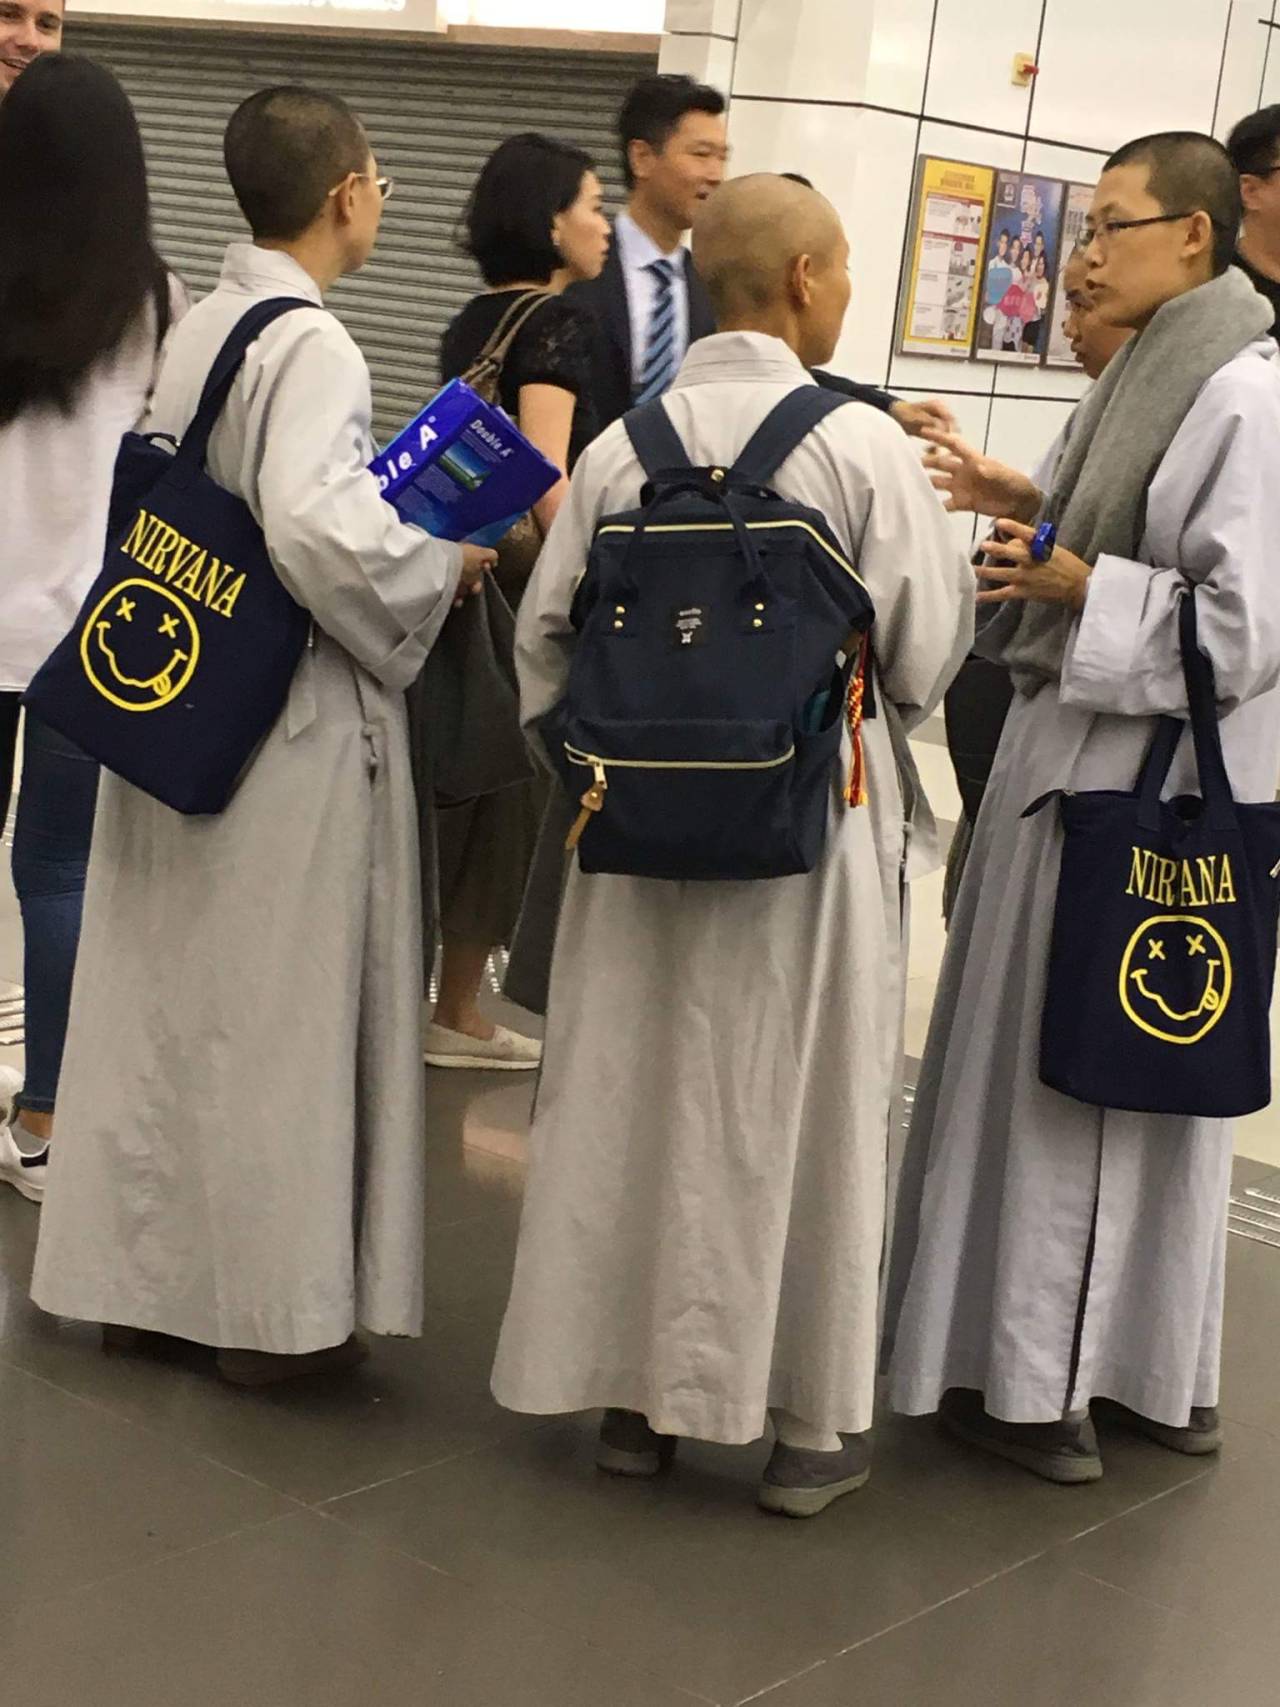 hubbins:
“ cooking-with-caustic-soda:
“ viralthings:
“Monks confused by band name
”
Maybe they also are into grunge
”
#theyre probably not confused and are just the funniest people on earth
”